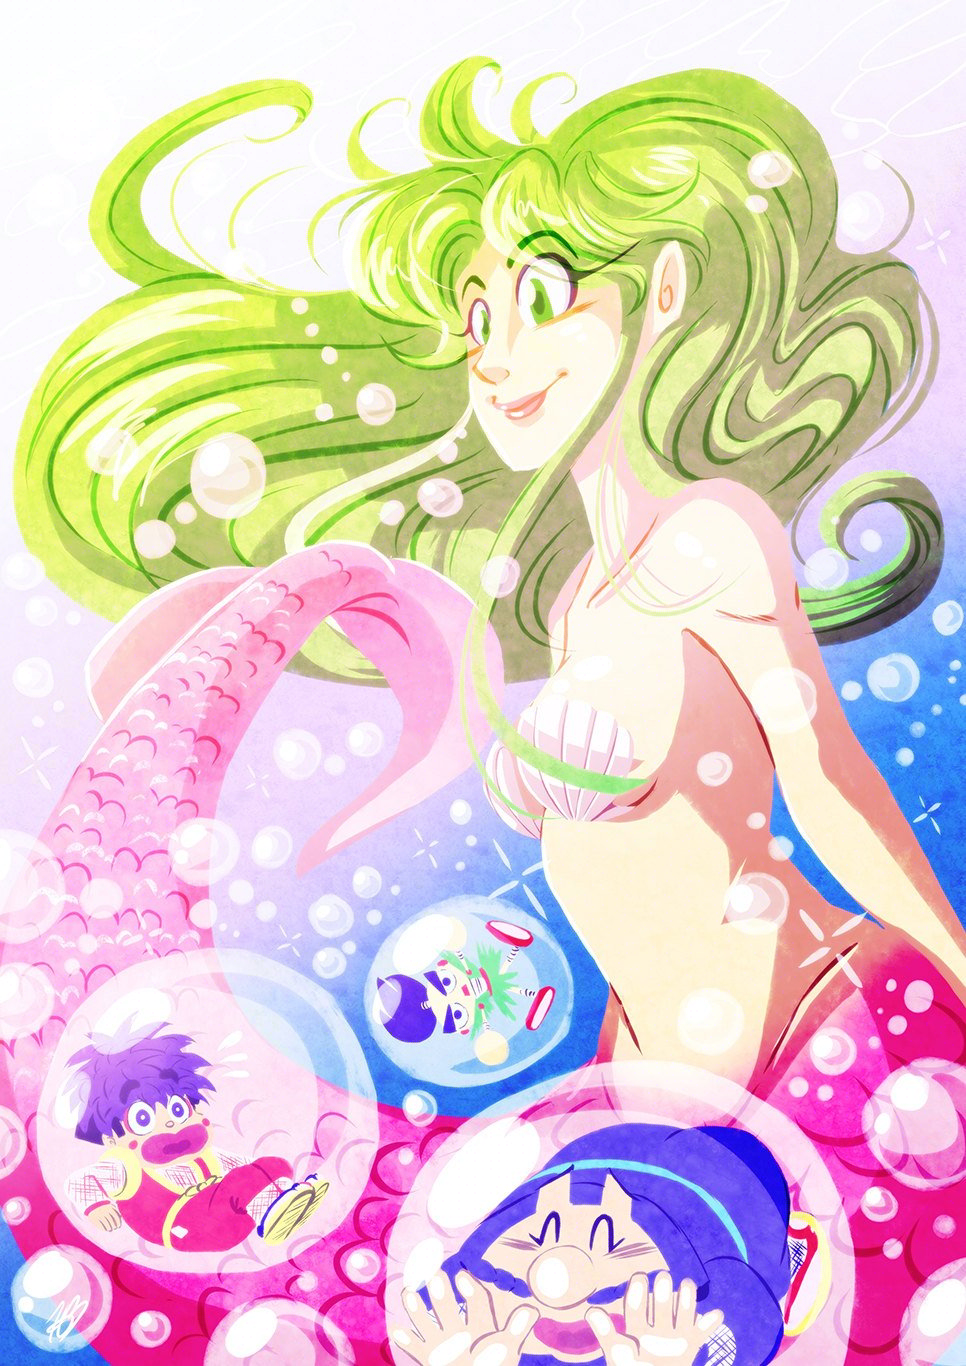 Digital illustration of a giant Yae from Mystical ninja in her mermaid form. Goemon, Ebisumaru and Sasuke are tiny and are caught up in bubbles under the water.